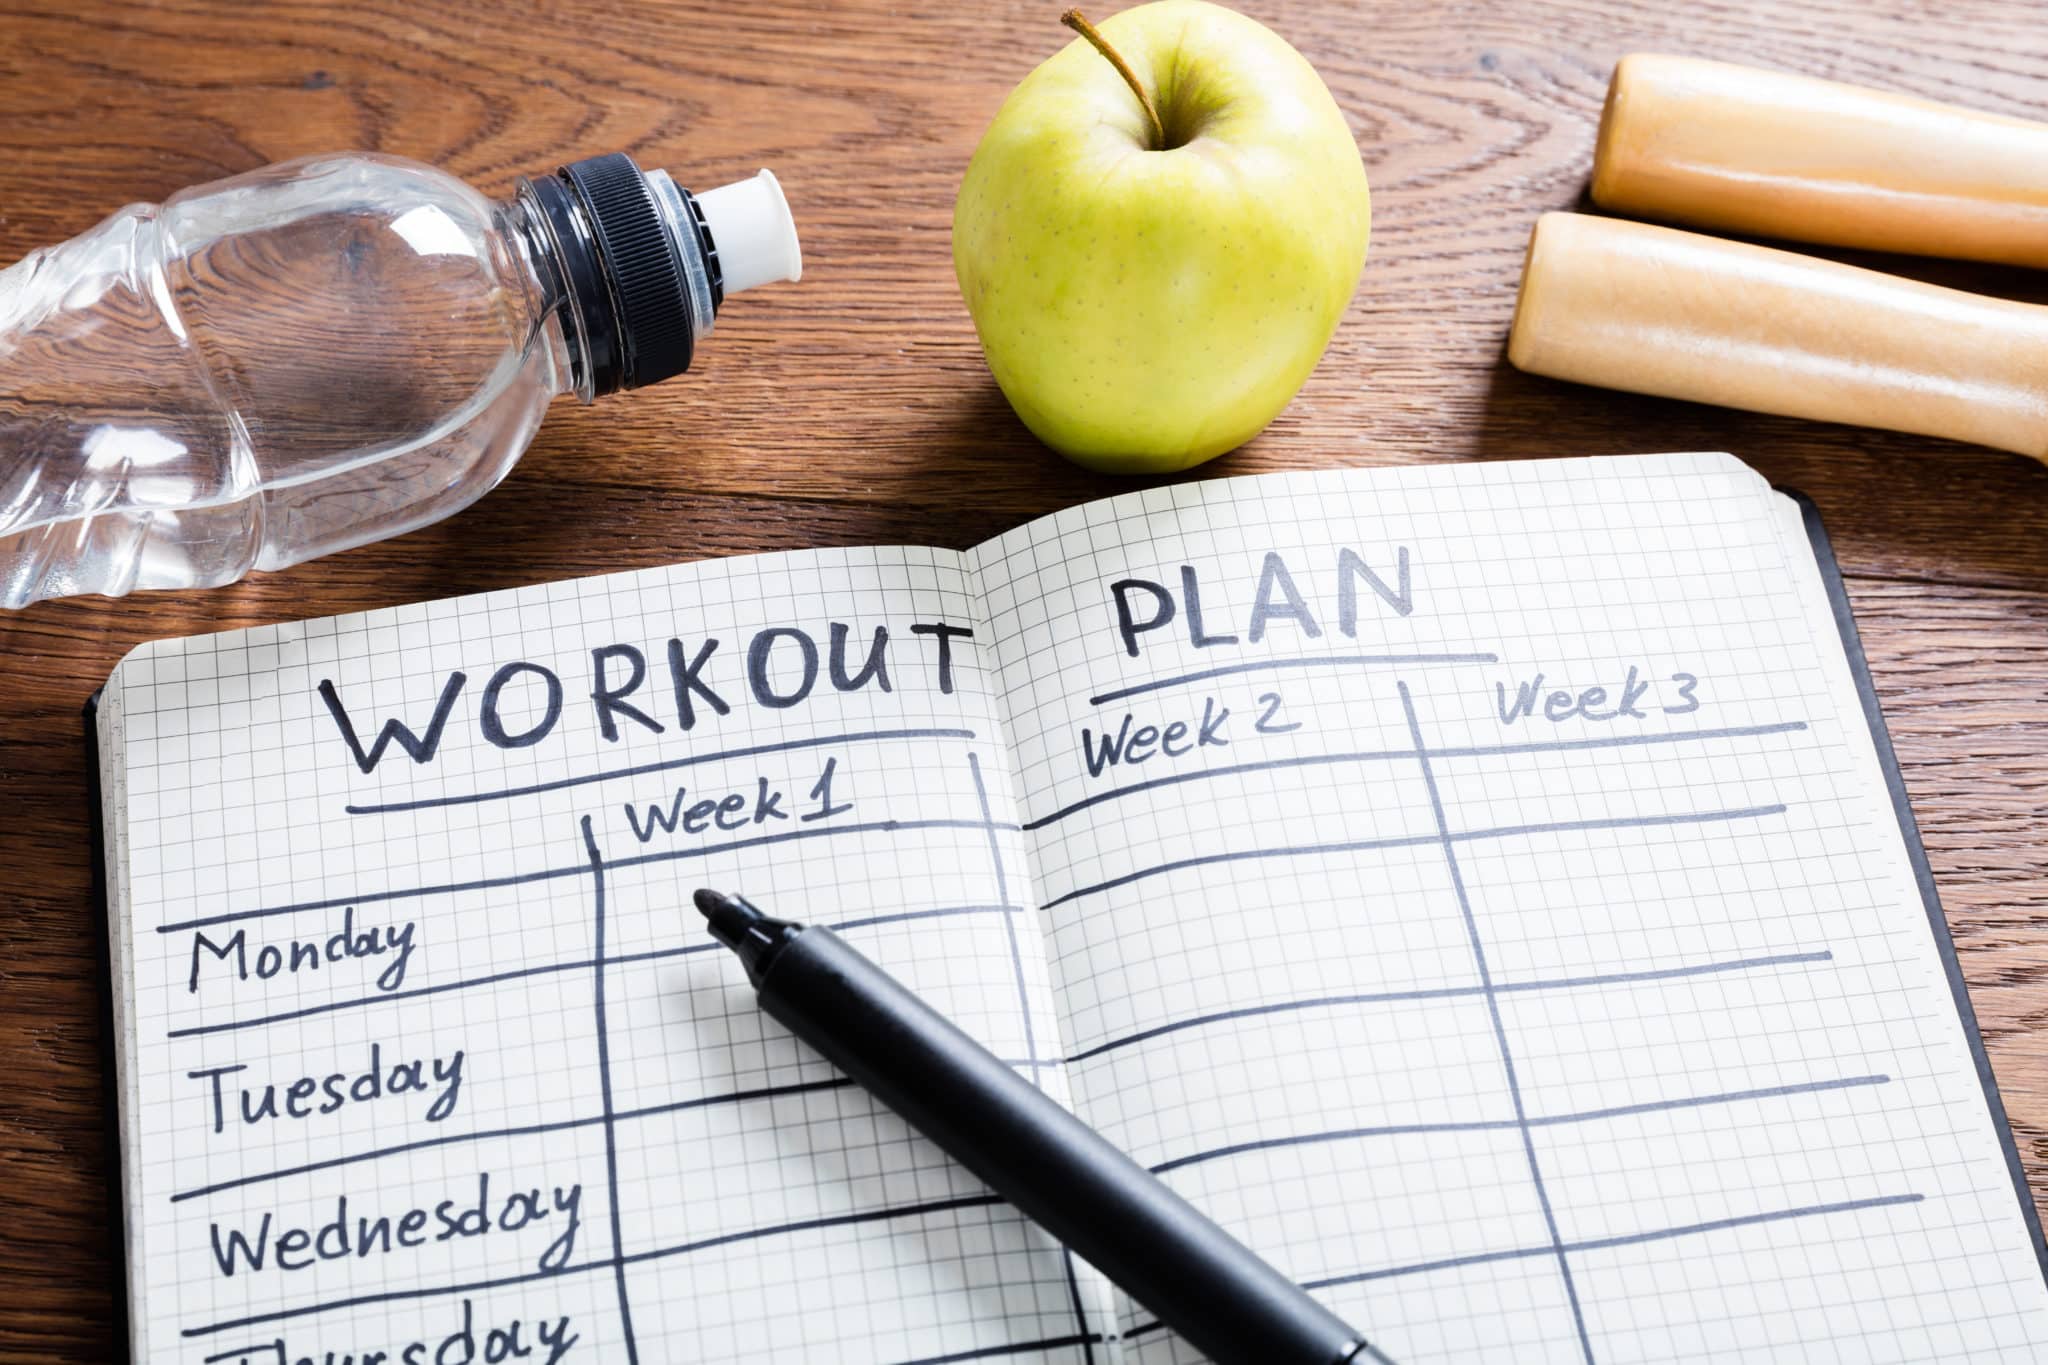 Notebook on table with text: Workout Plan